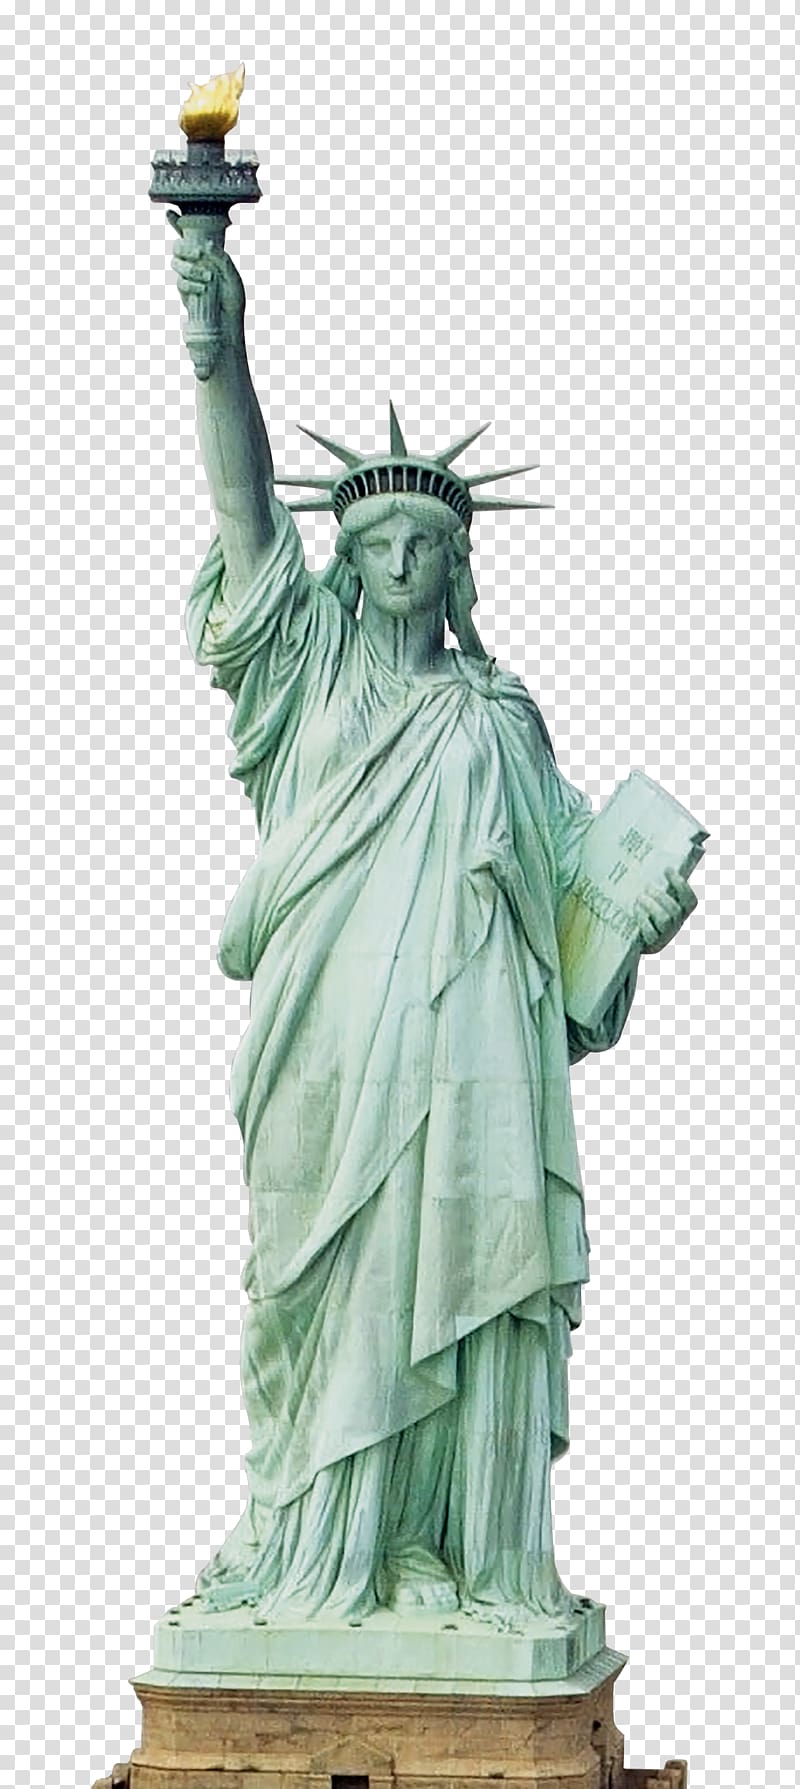 Statue of Liberty, Statue of Liberty New York Harbor Staten Island Ferry Colossus of Rhodes The New Colossus, Statue of Liberty Background transparent background PNG clipart